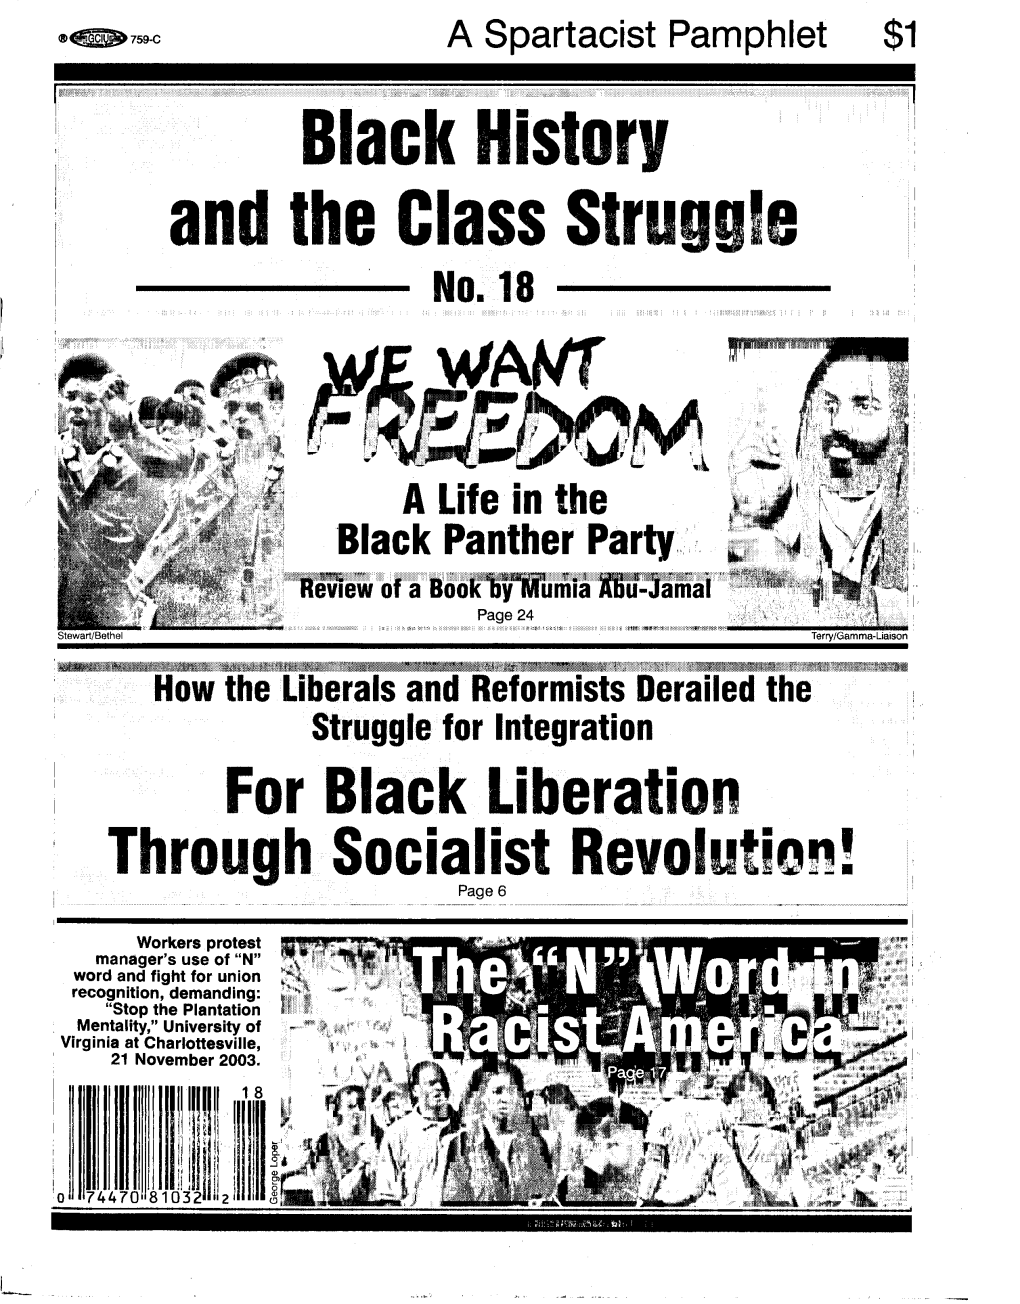 Black History and the Class Struggle